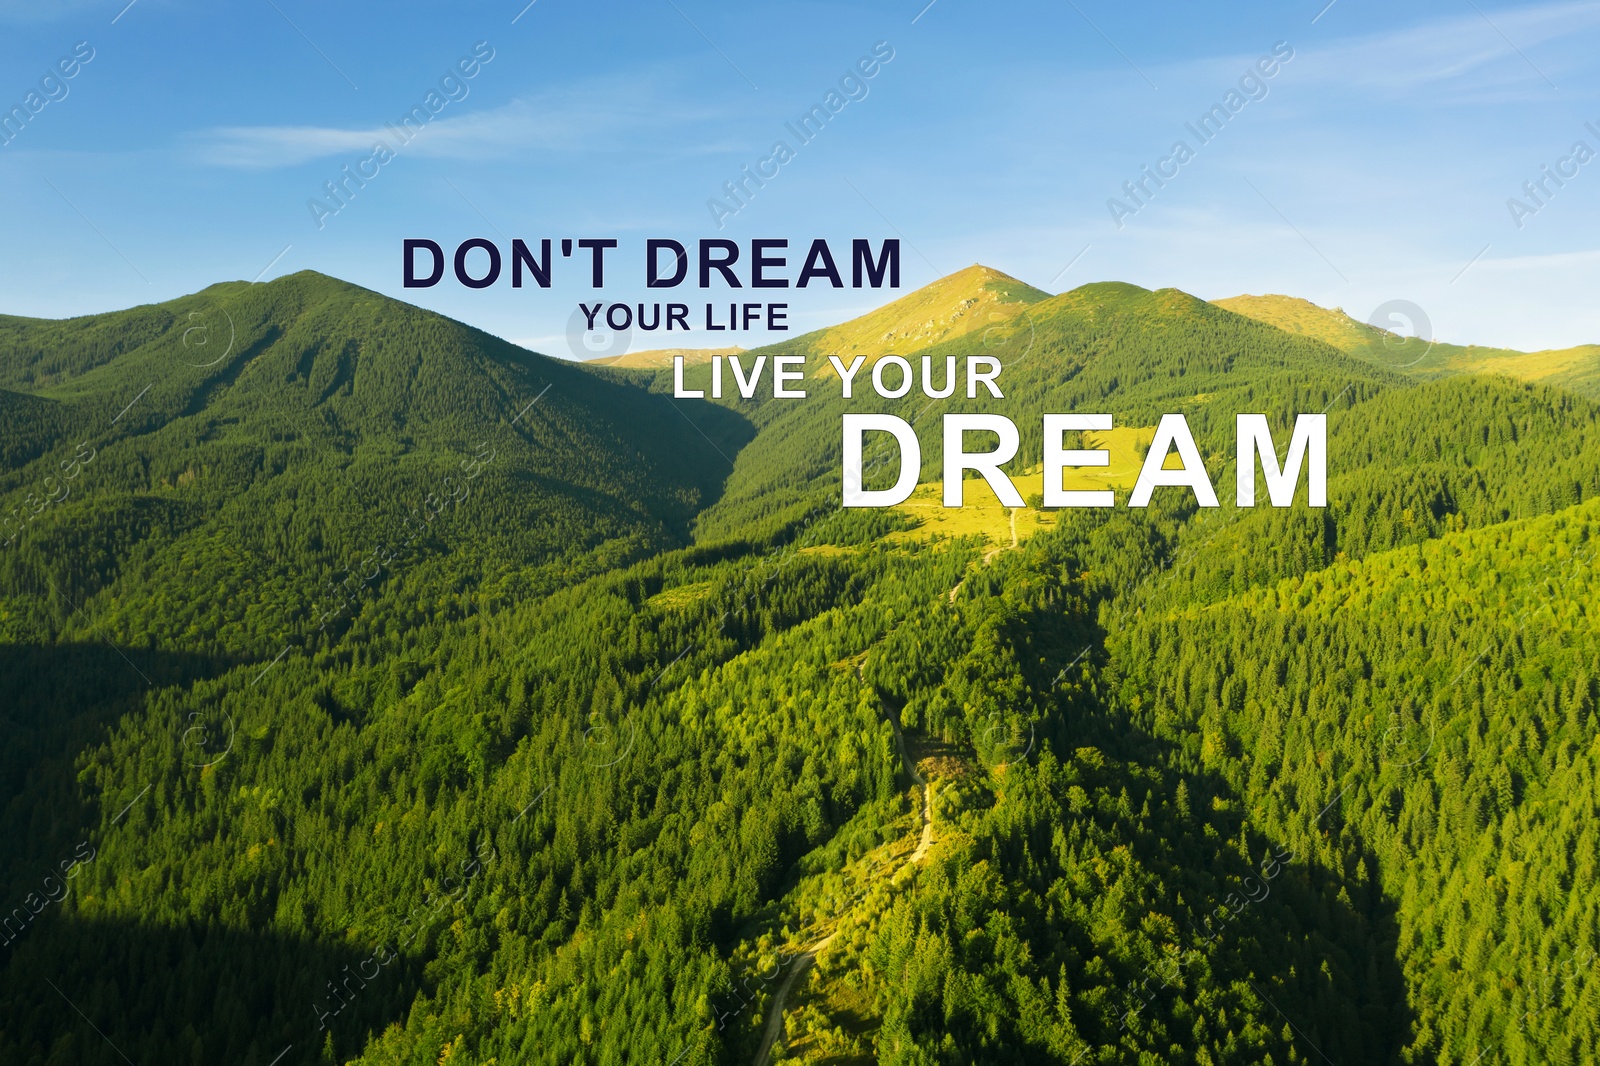 Image of Don't Dream Your Life Live Your Dream. Motivational quote inspiring to make real actions, not only fantasize. Text against beautiful mountain landscape